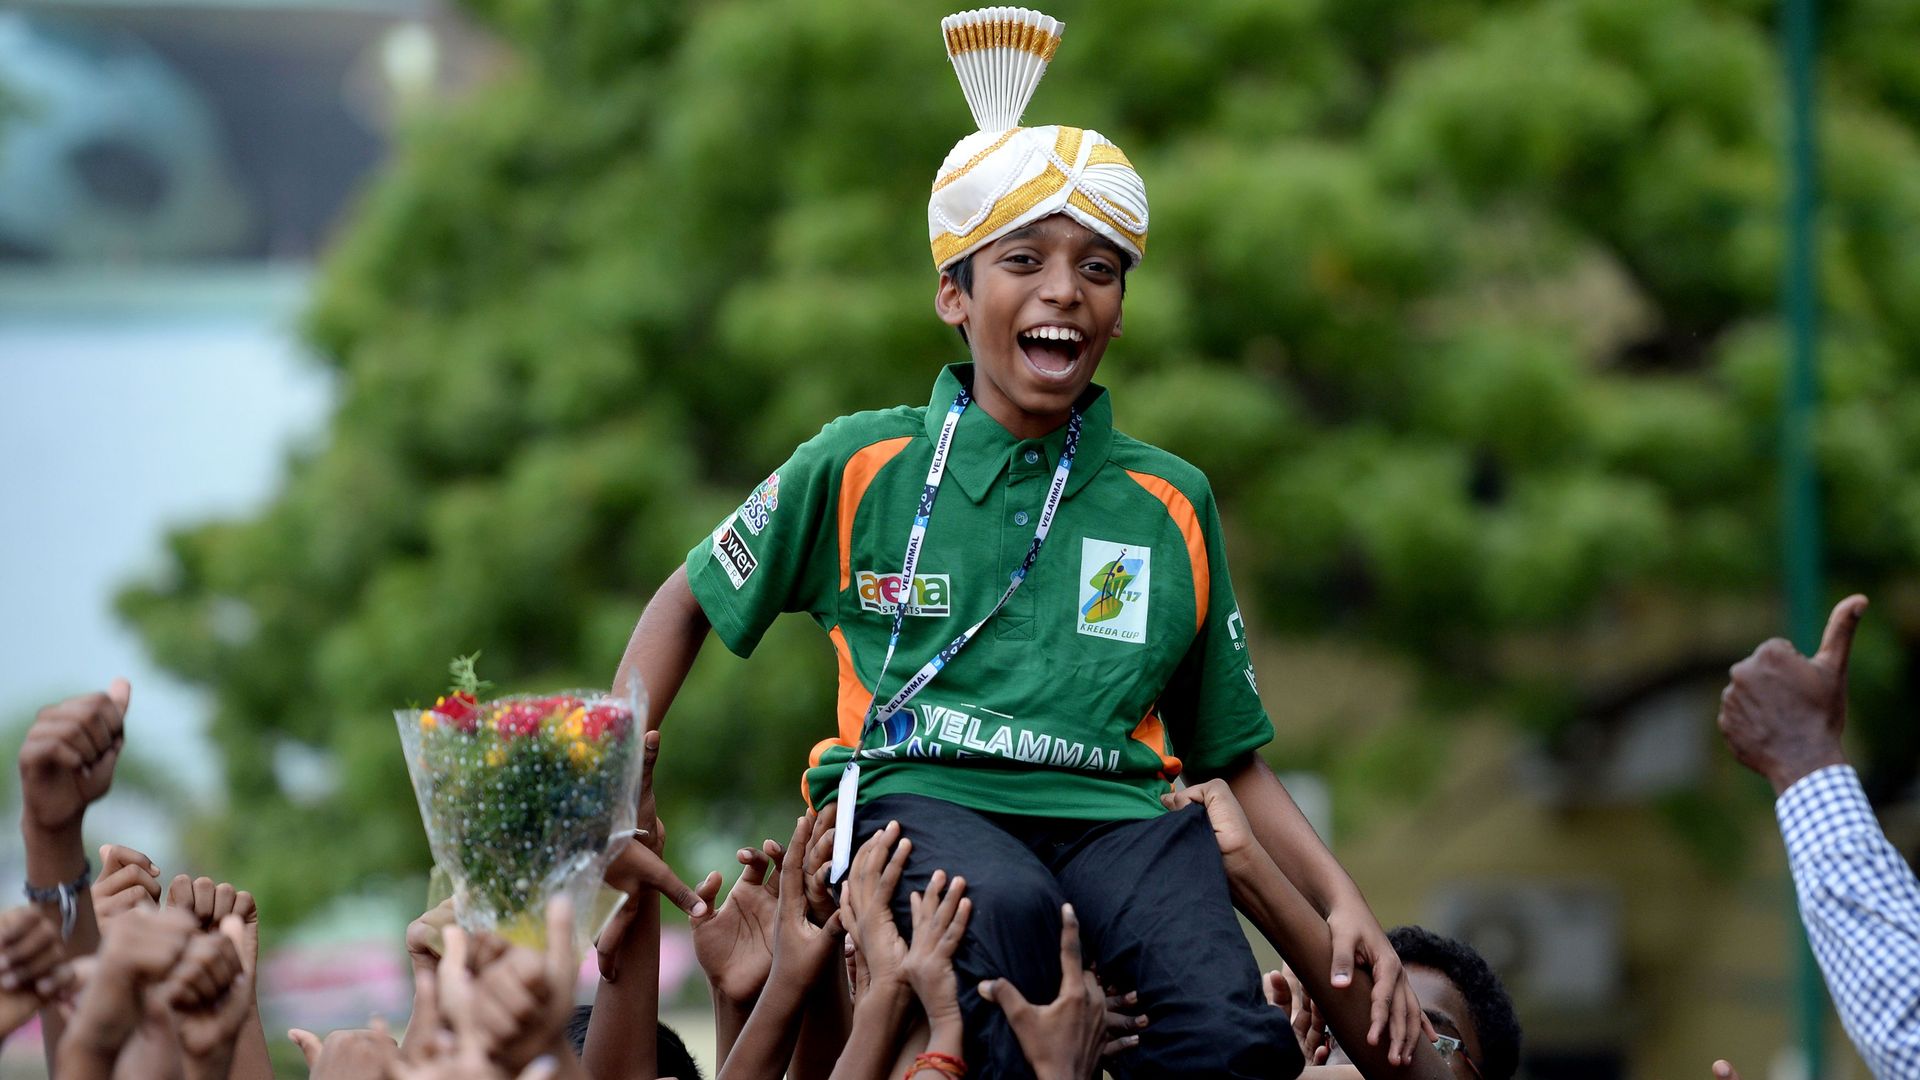  Indian chess prodigy Rameshbabu Praggnanandhaa, 12, laughs as he is celebrated by his school friends upon his arrival back to his school in Chennai on June 26, 2018 